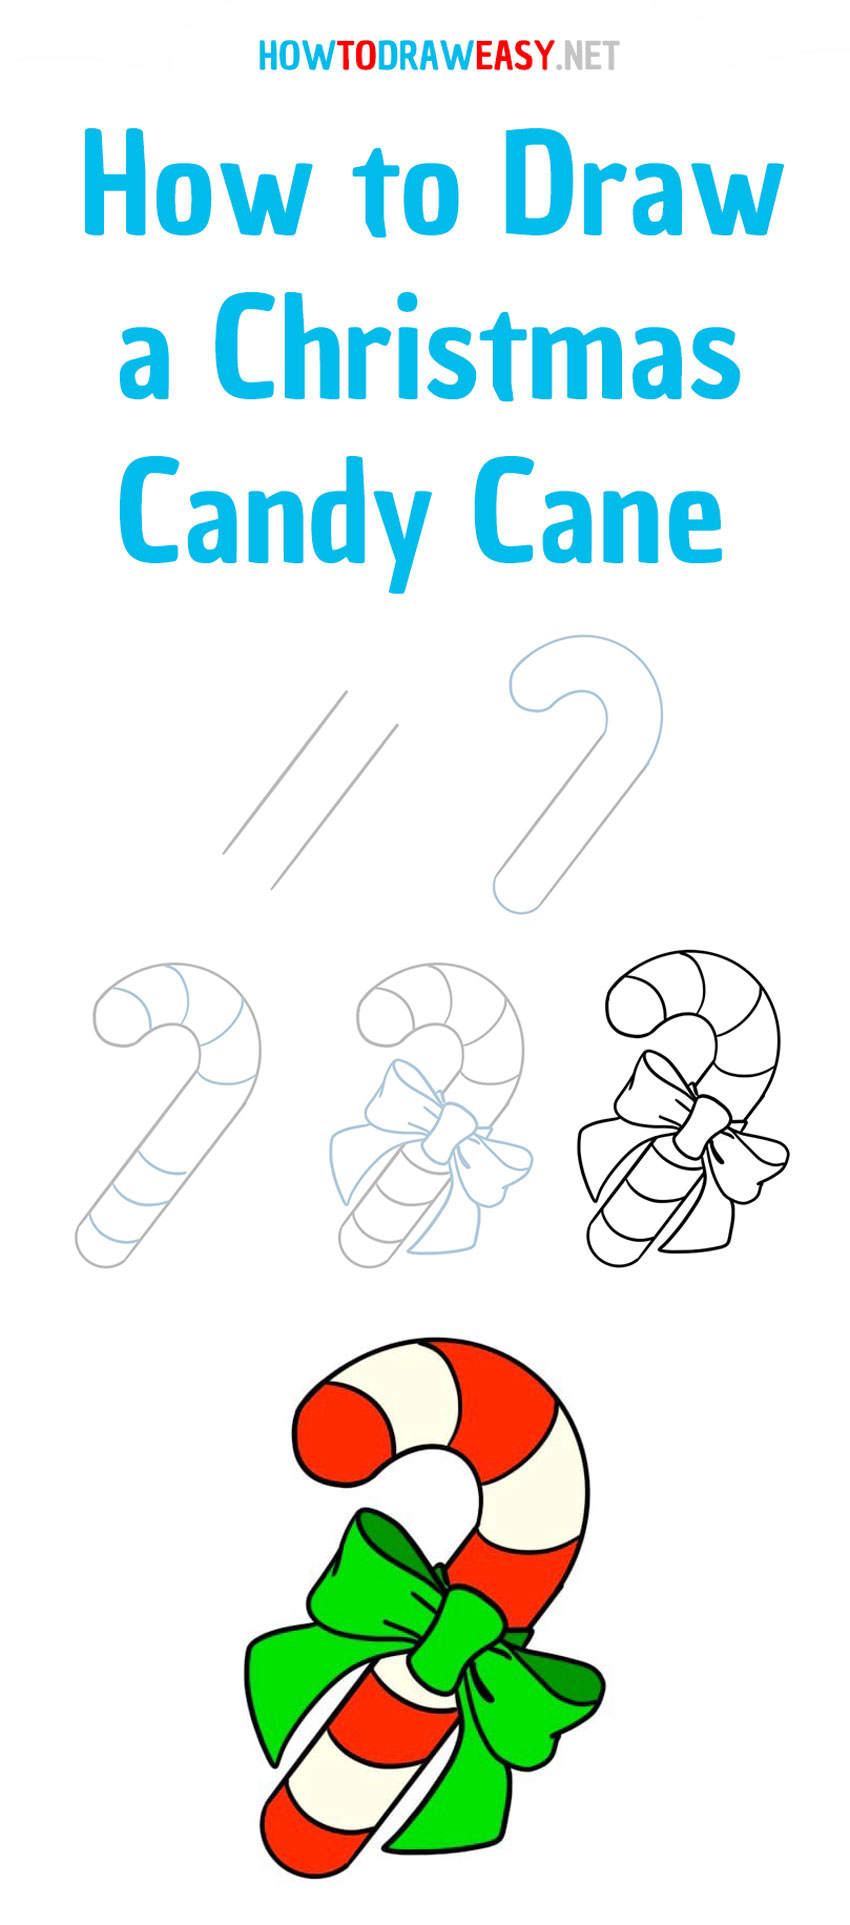 how-to-draw-a-christmas-candy-cane-step-by-step